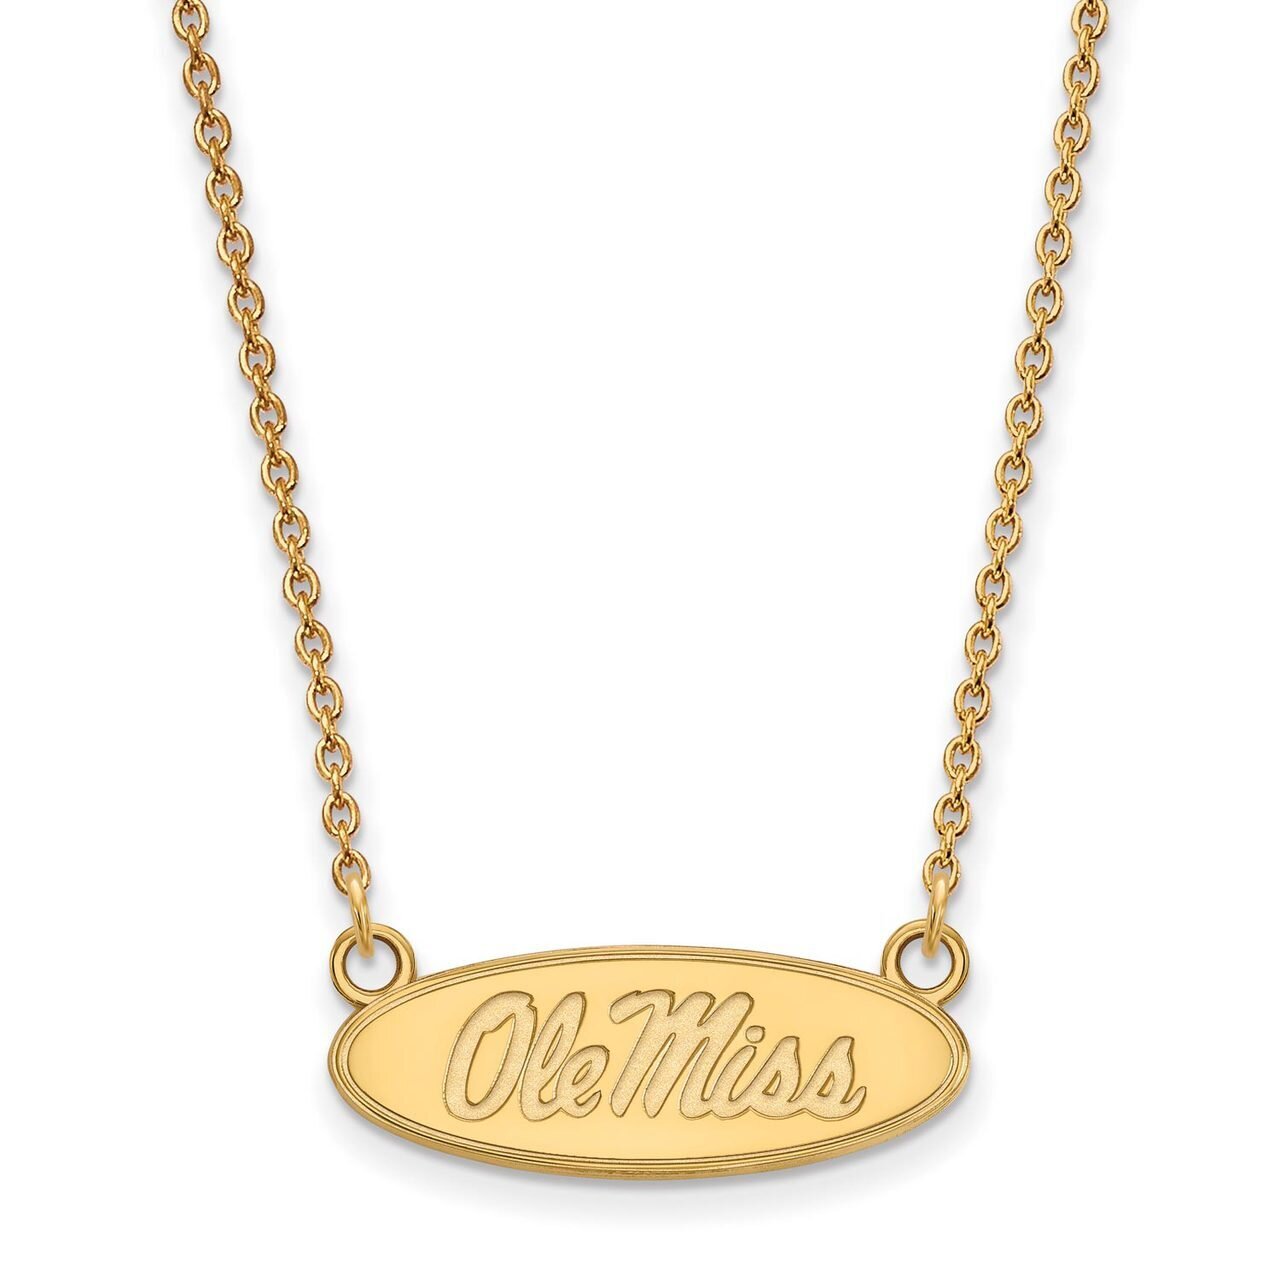 University of Missisippi Small Pendant with Chain Necklace Gold-plated Silver GP015UMS-18